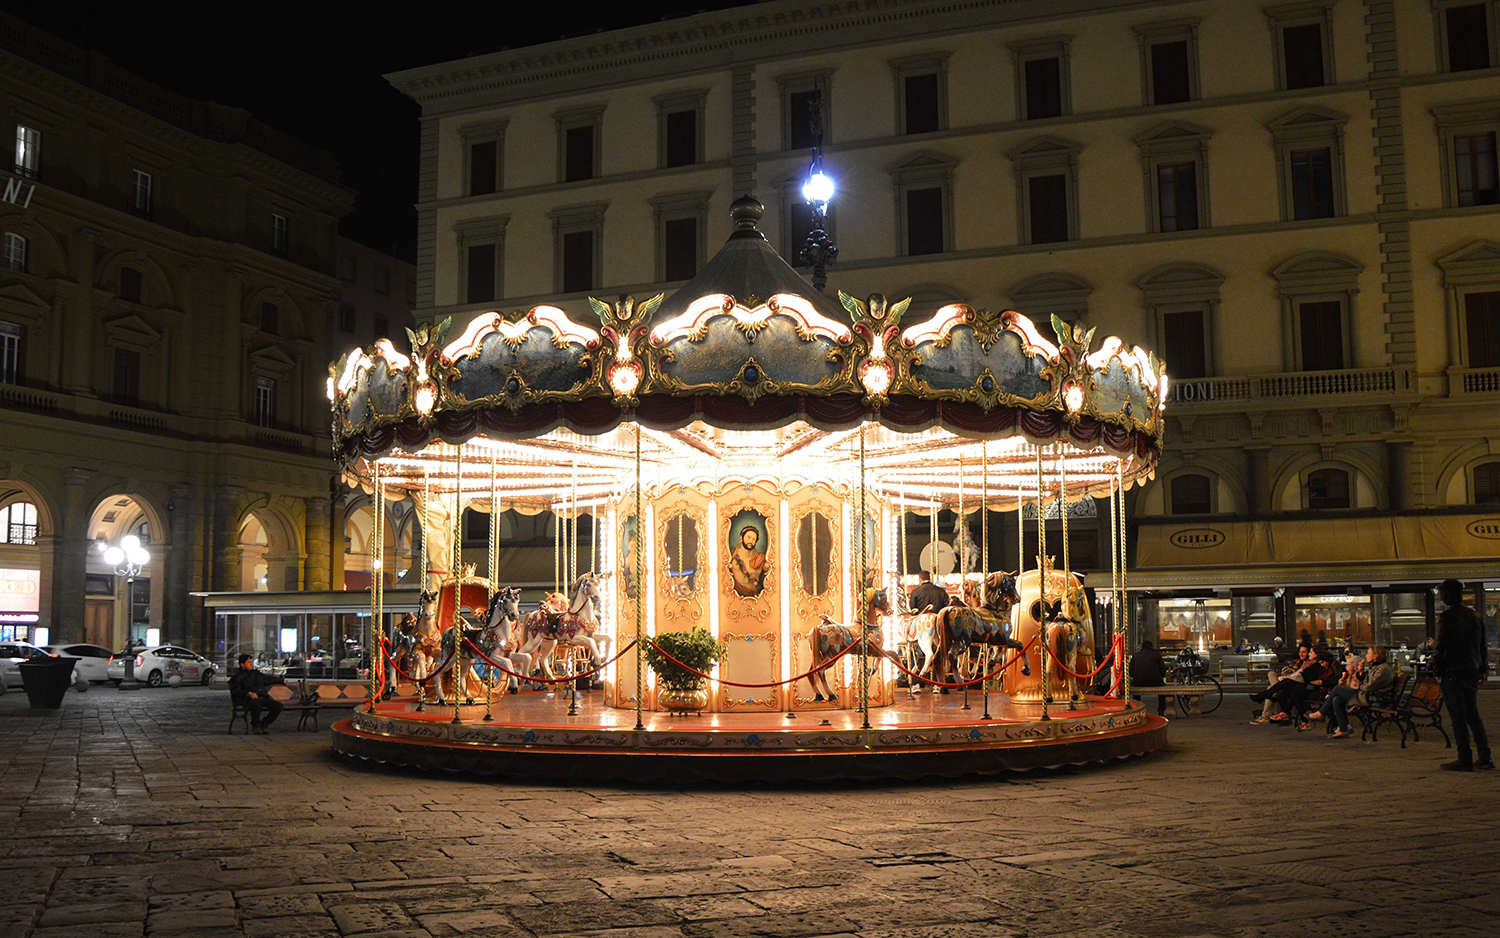 FLORENCE, ITALY - MARCH 15, 2017: Carousel at night iluminated in the middle of the square in Florence. Unidentified tourists waiting around